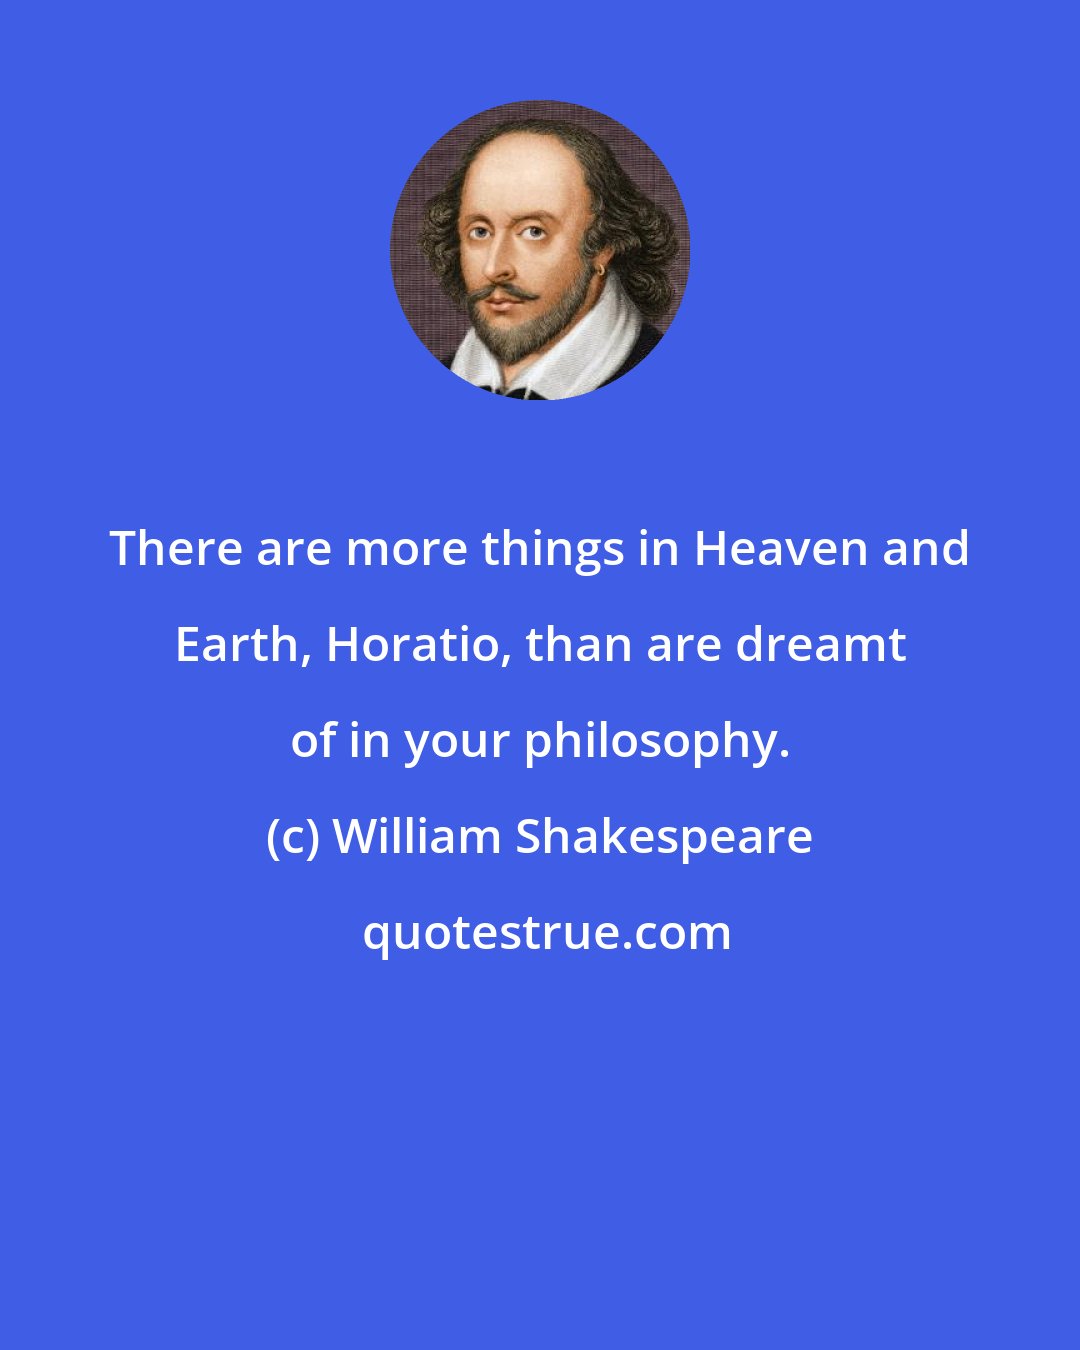 William Shakespeare: There are more things in Heaven and Earth, Horatio, than are dreamt of in your philosophy.